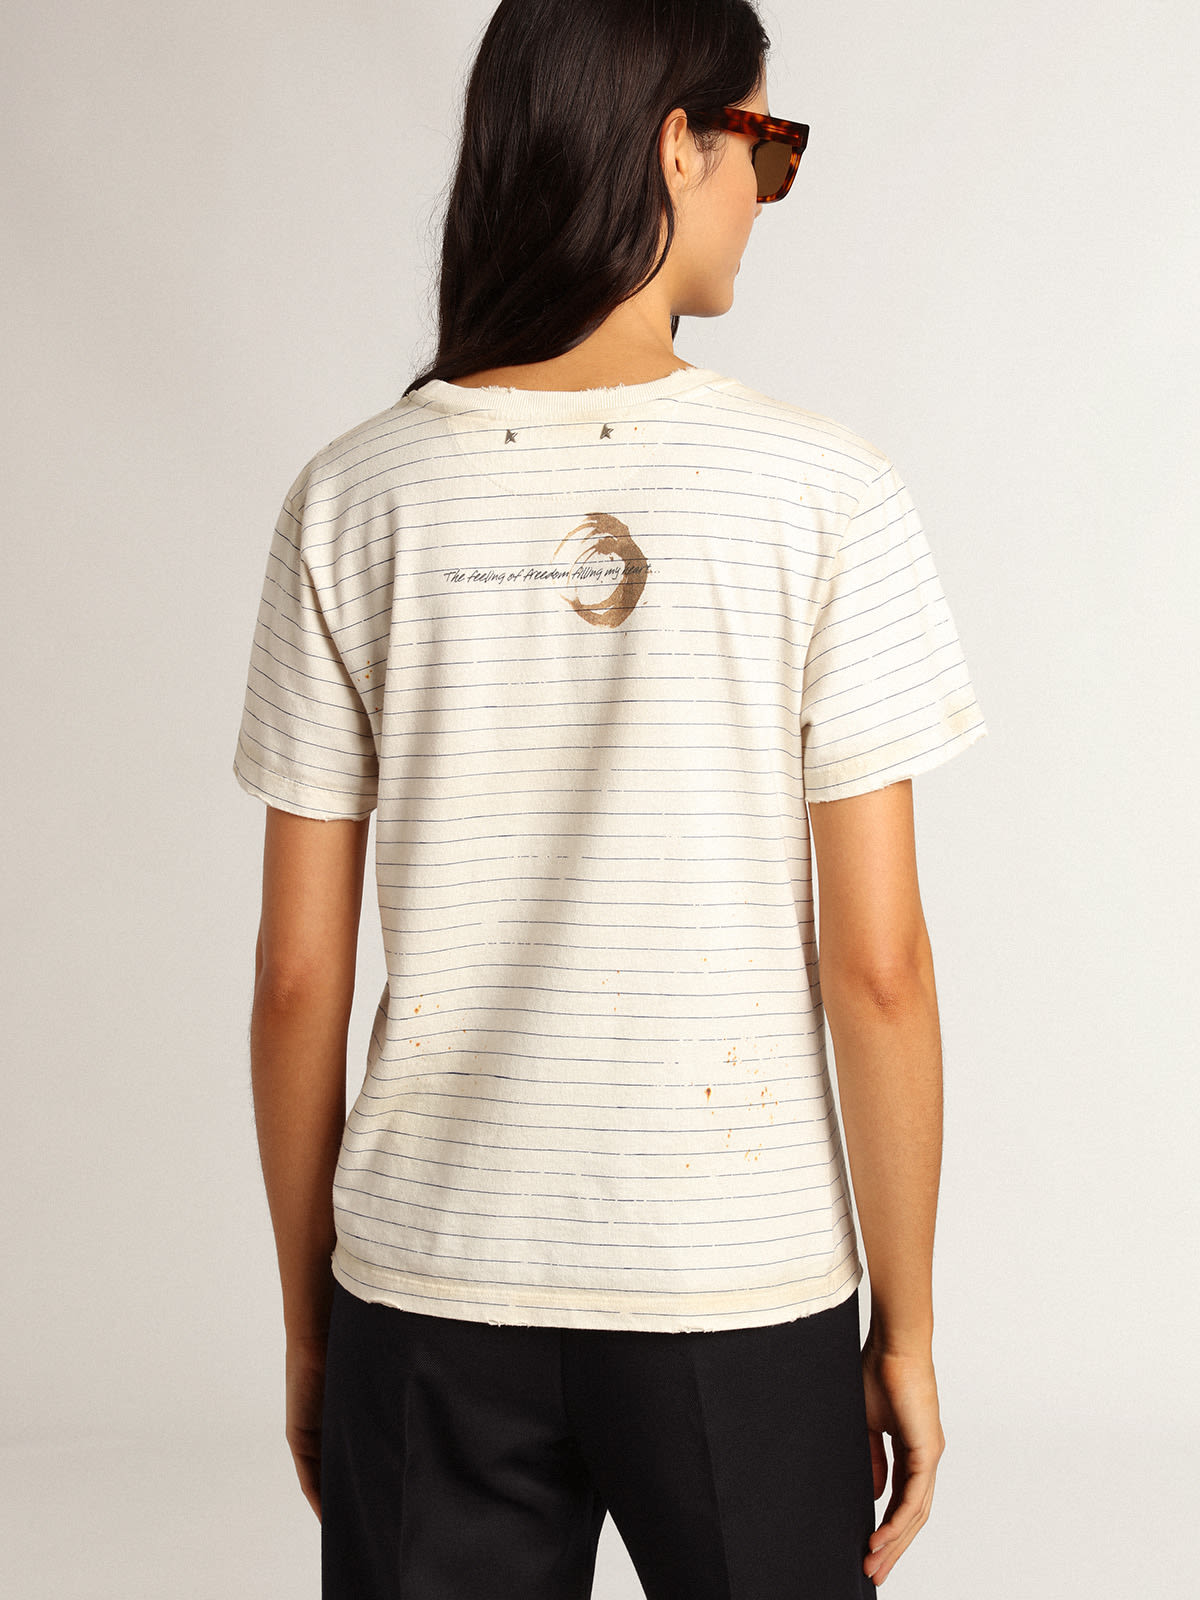 T-shirt with vintage notebook | Golden Goose